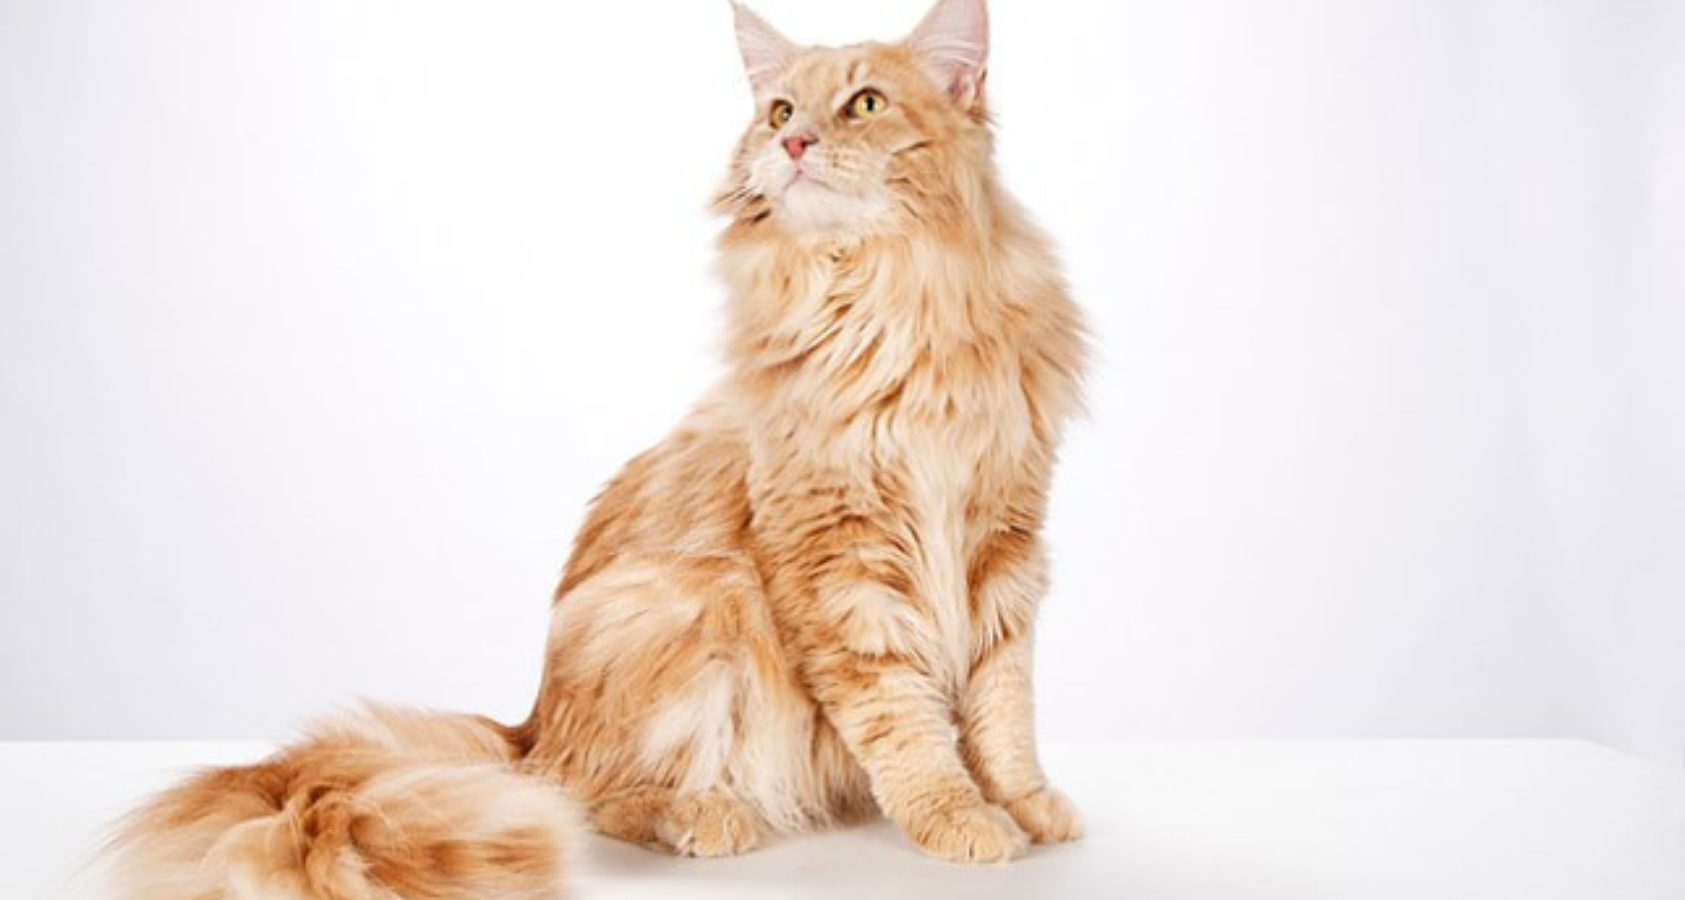 9 Fluffy Orange Cat Breeds You’ll Fall in Love With!